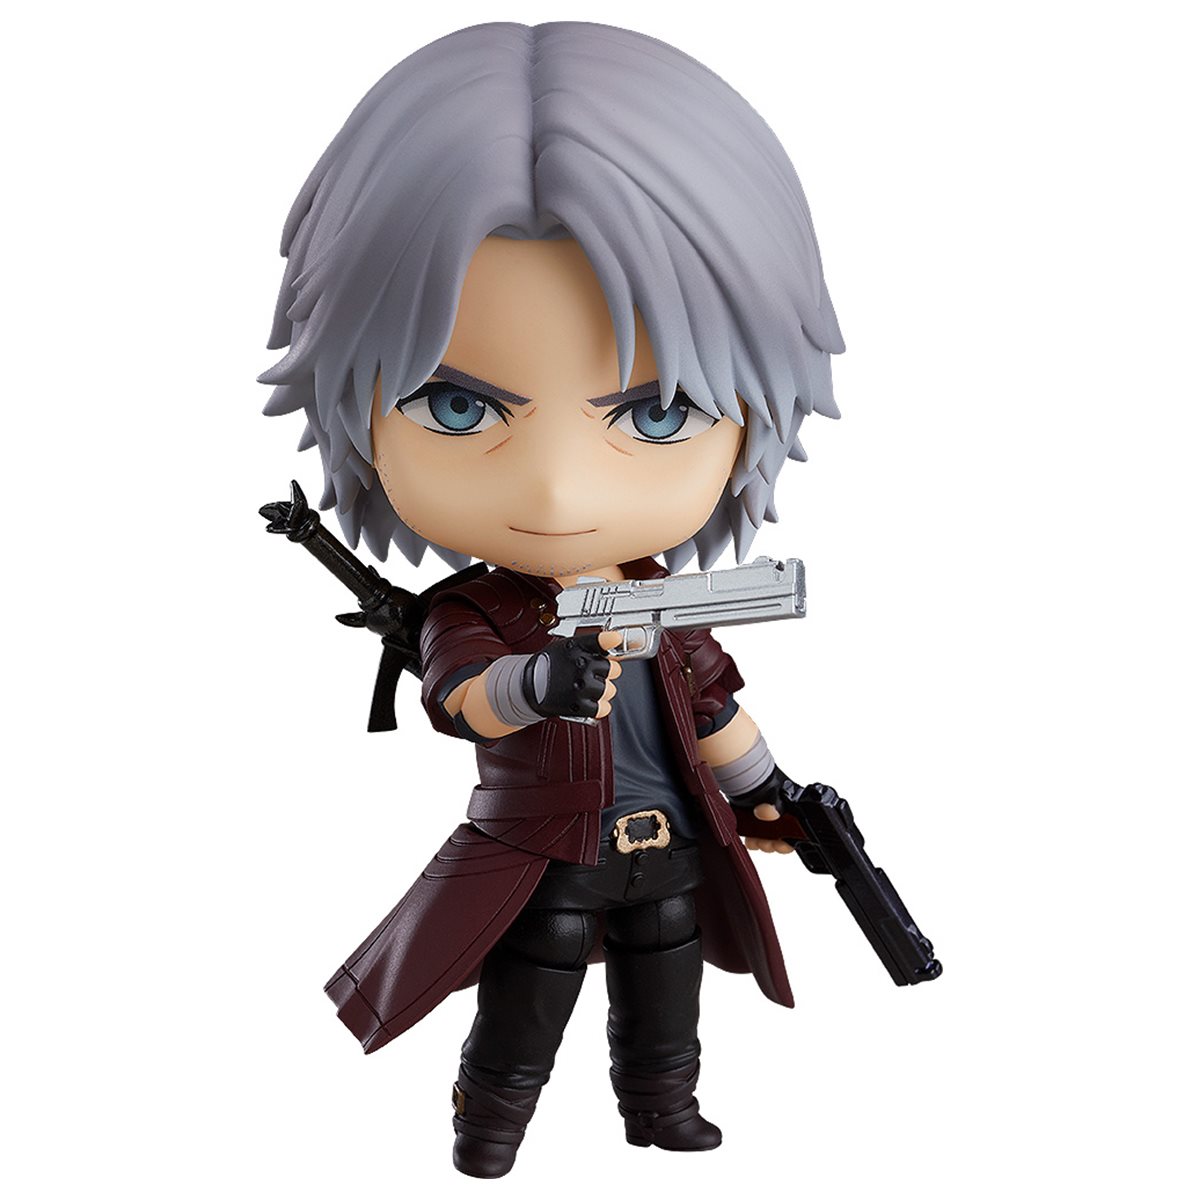 devil may cry 5 action figure